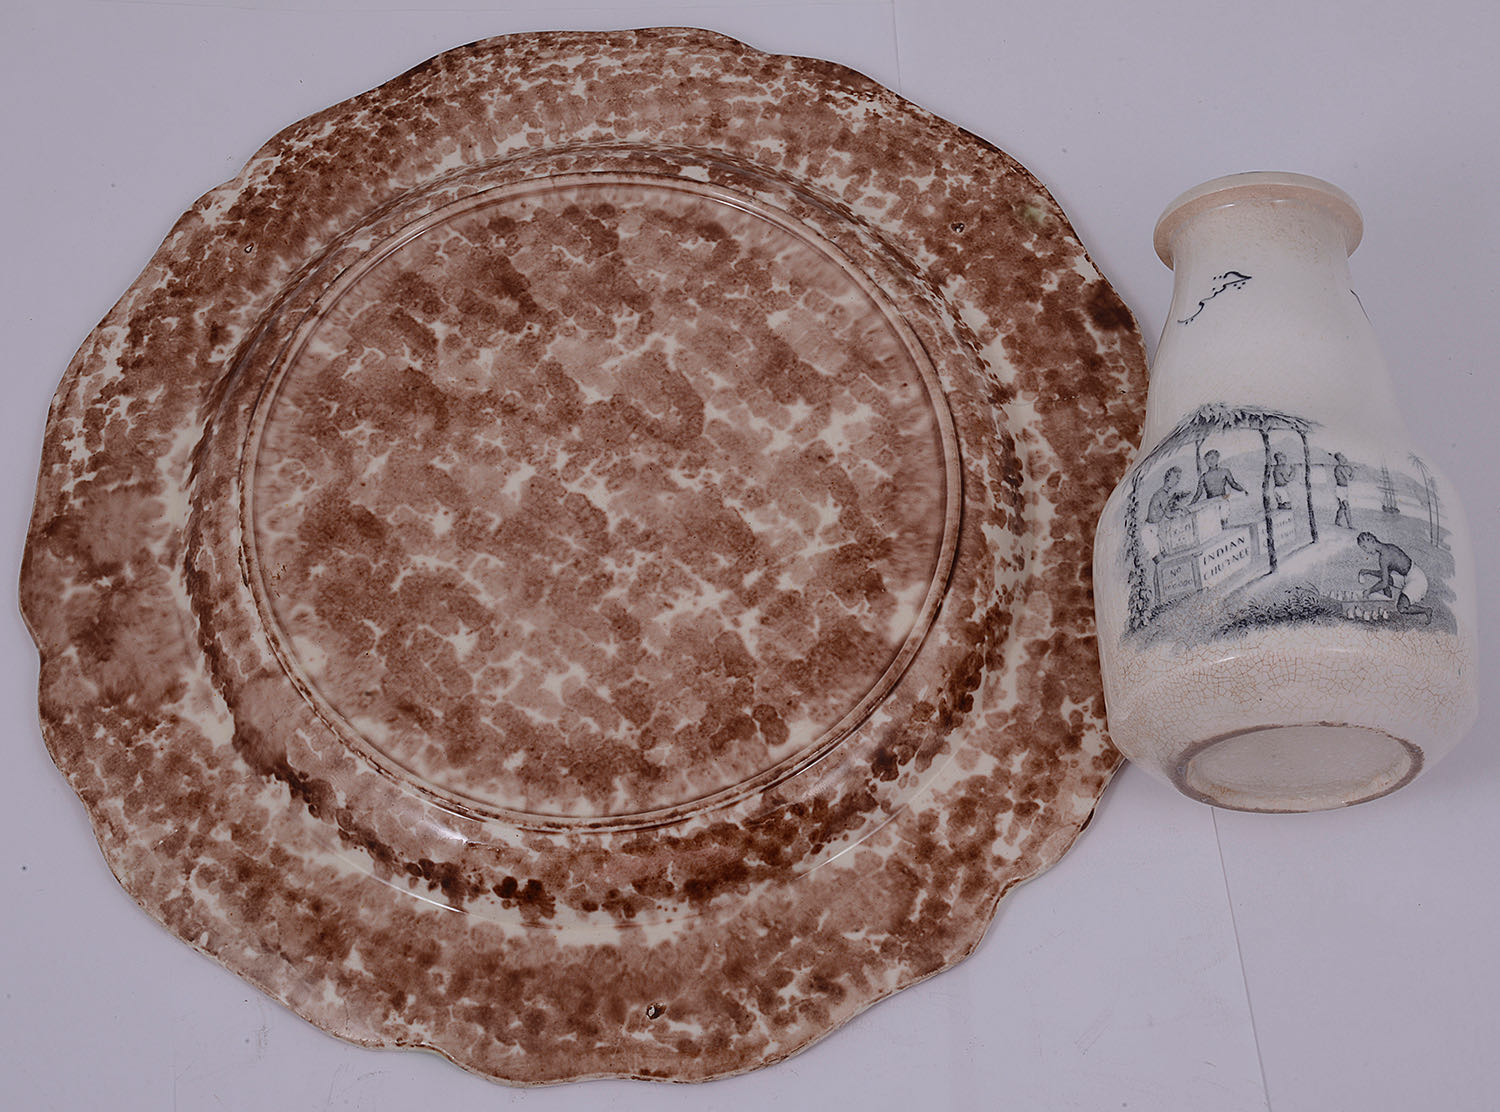 A Batty's Indian Chutney pottery jar and a late 18th c. Whieldon plate - Image 2 of 2